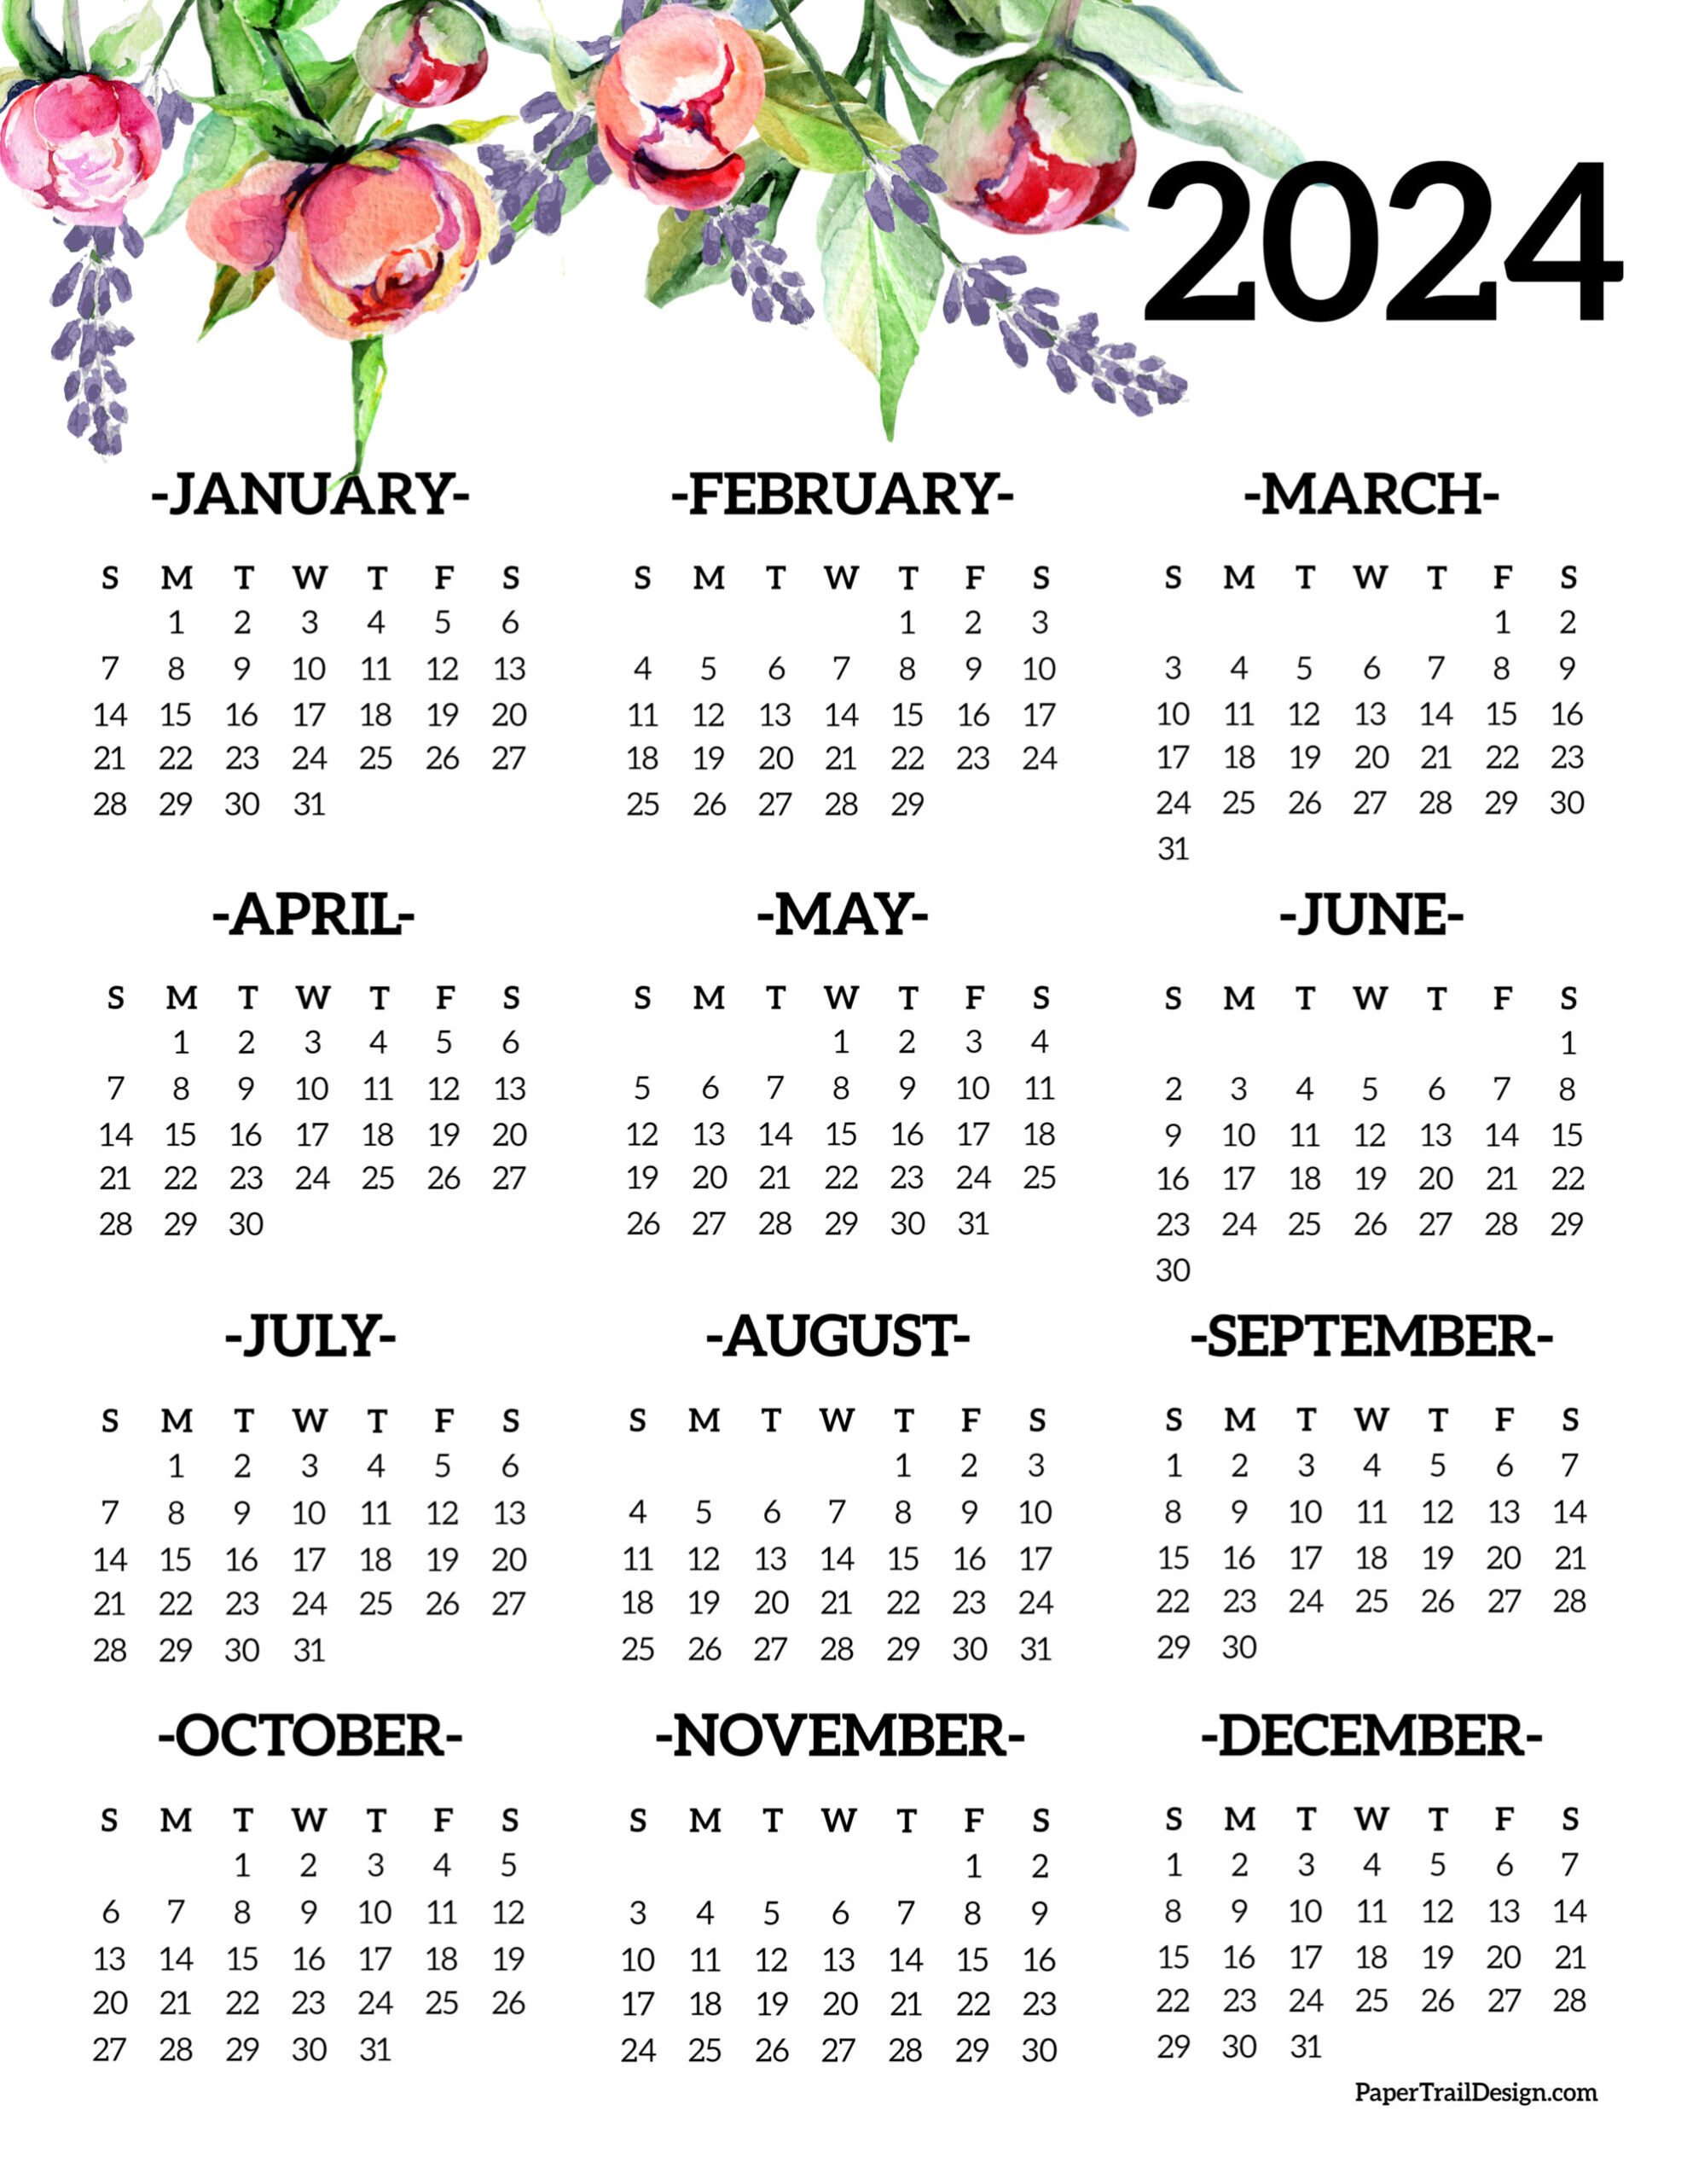 Calendar 2024 Printable One Page - Paper Trail Design for 2024 Single Page Printable Calendar